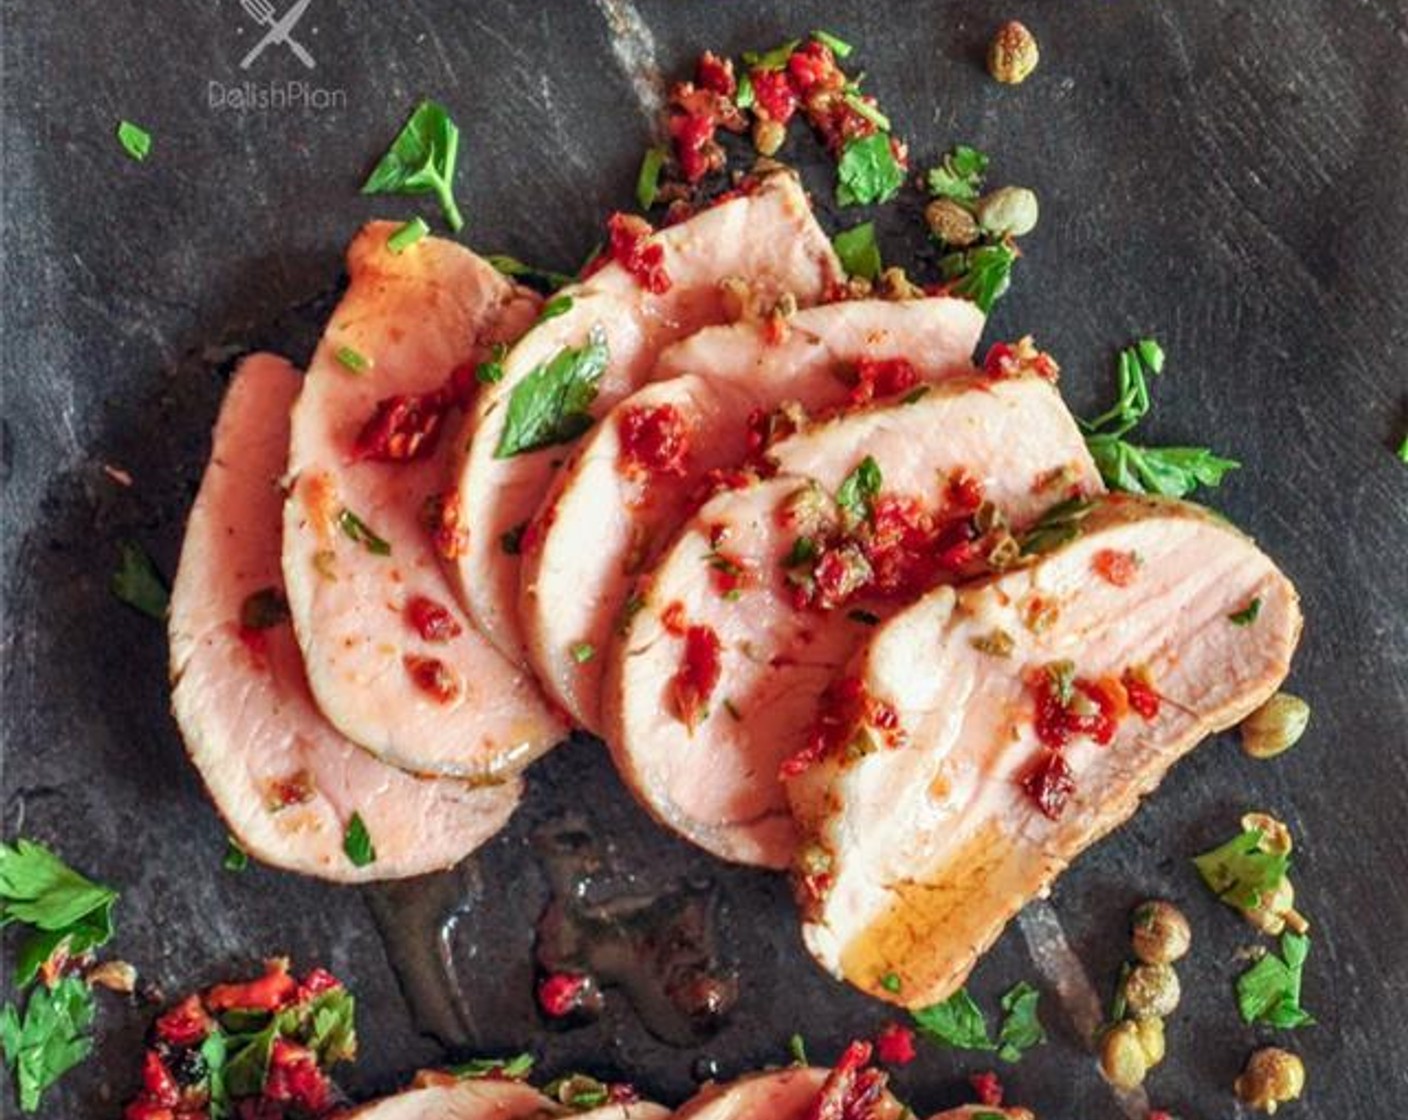 Pork Tenderloin with Sun-Dried Tomatoes and Capers